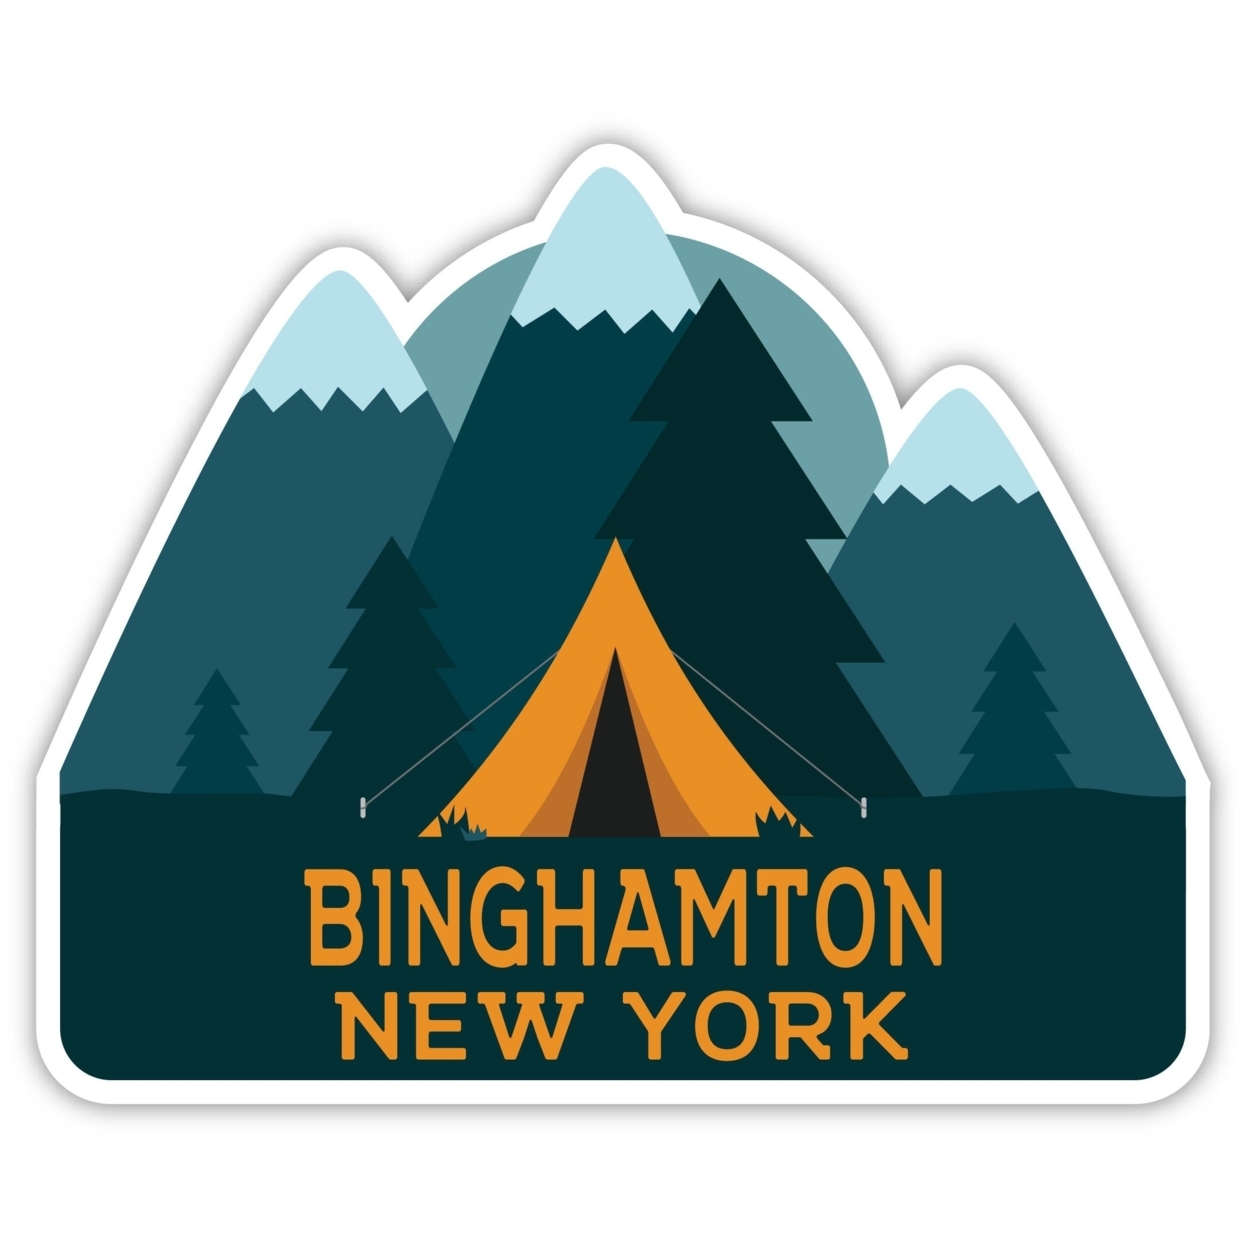 Binghamton New York Souvenir Decorative Stickers (Choose Theme And Size) - 4-Pack, 4-Inch, Tent